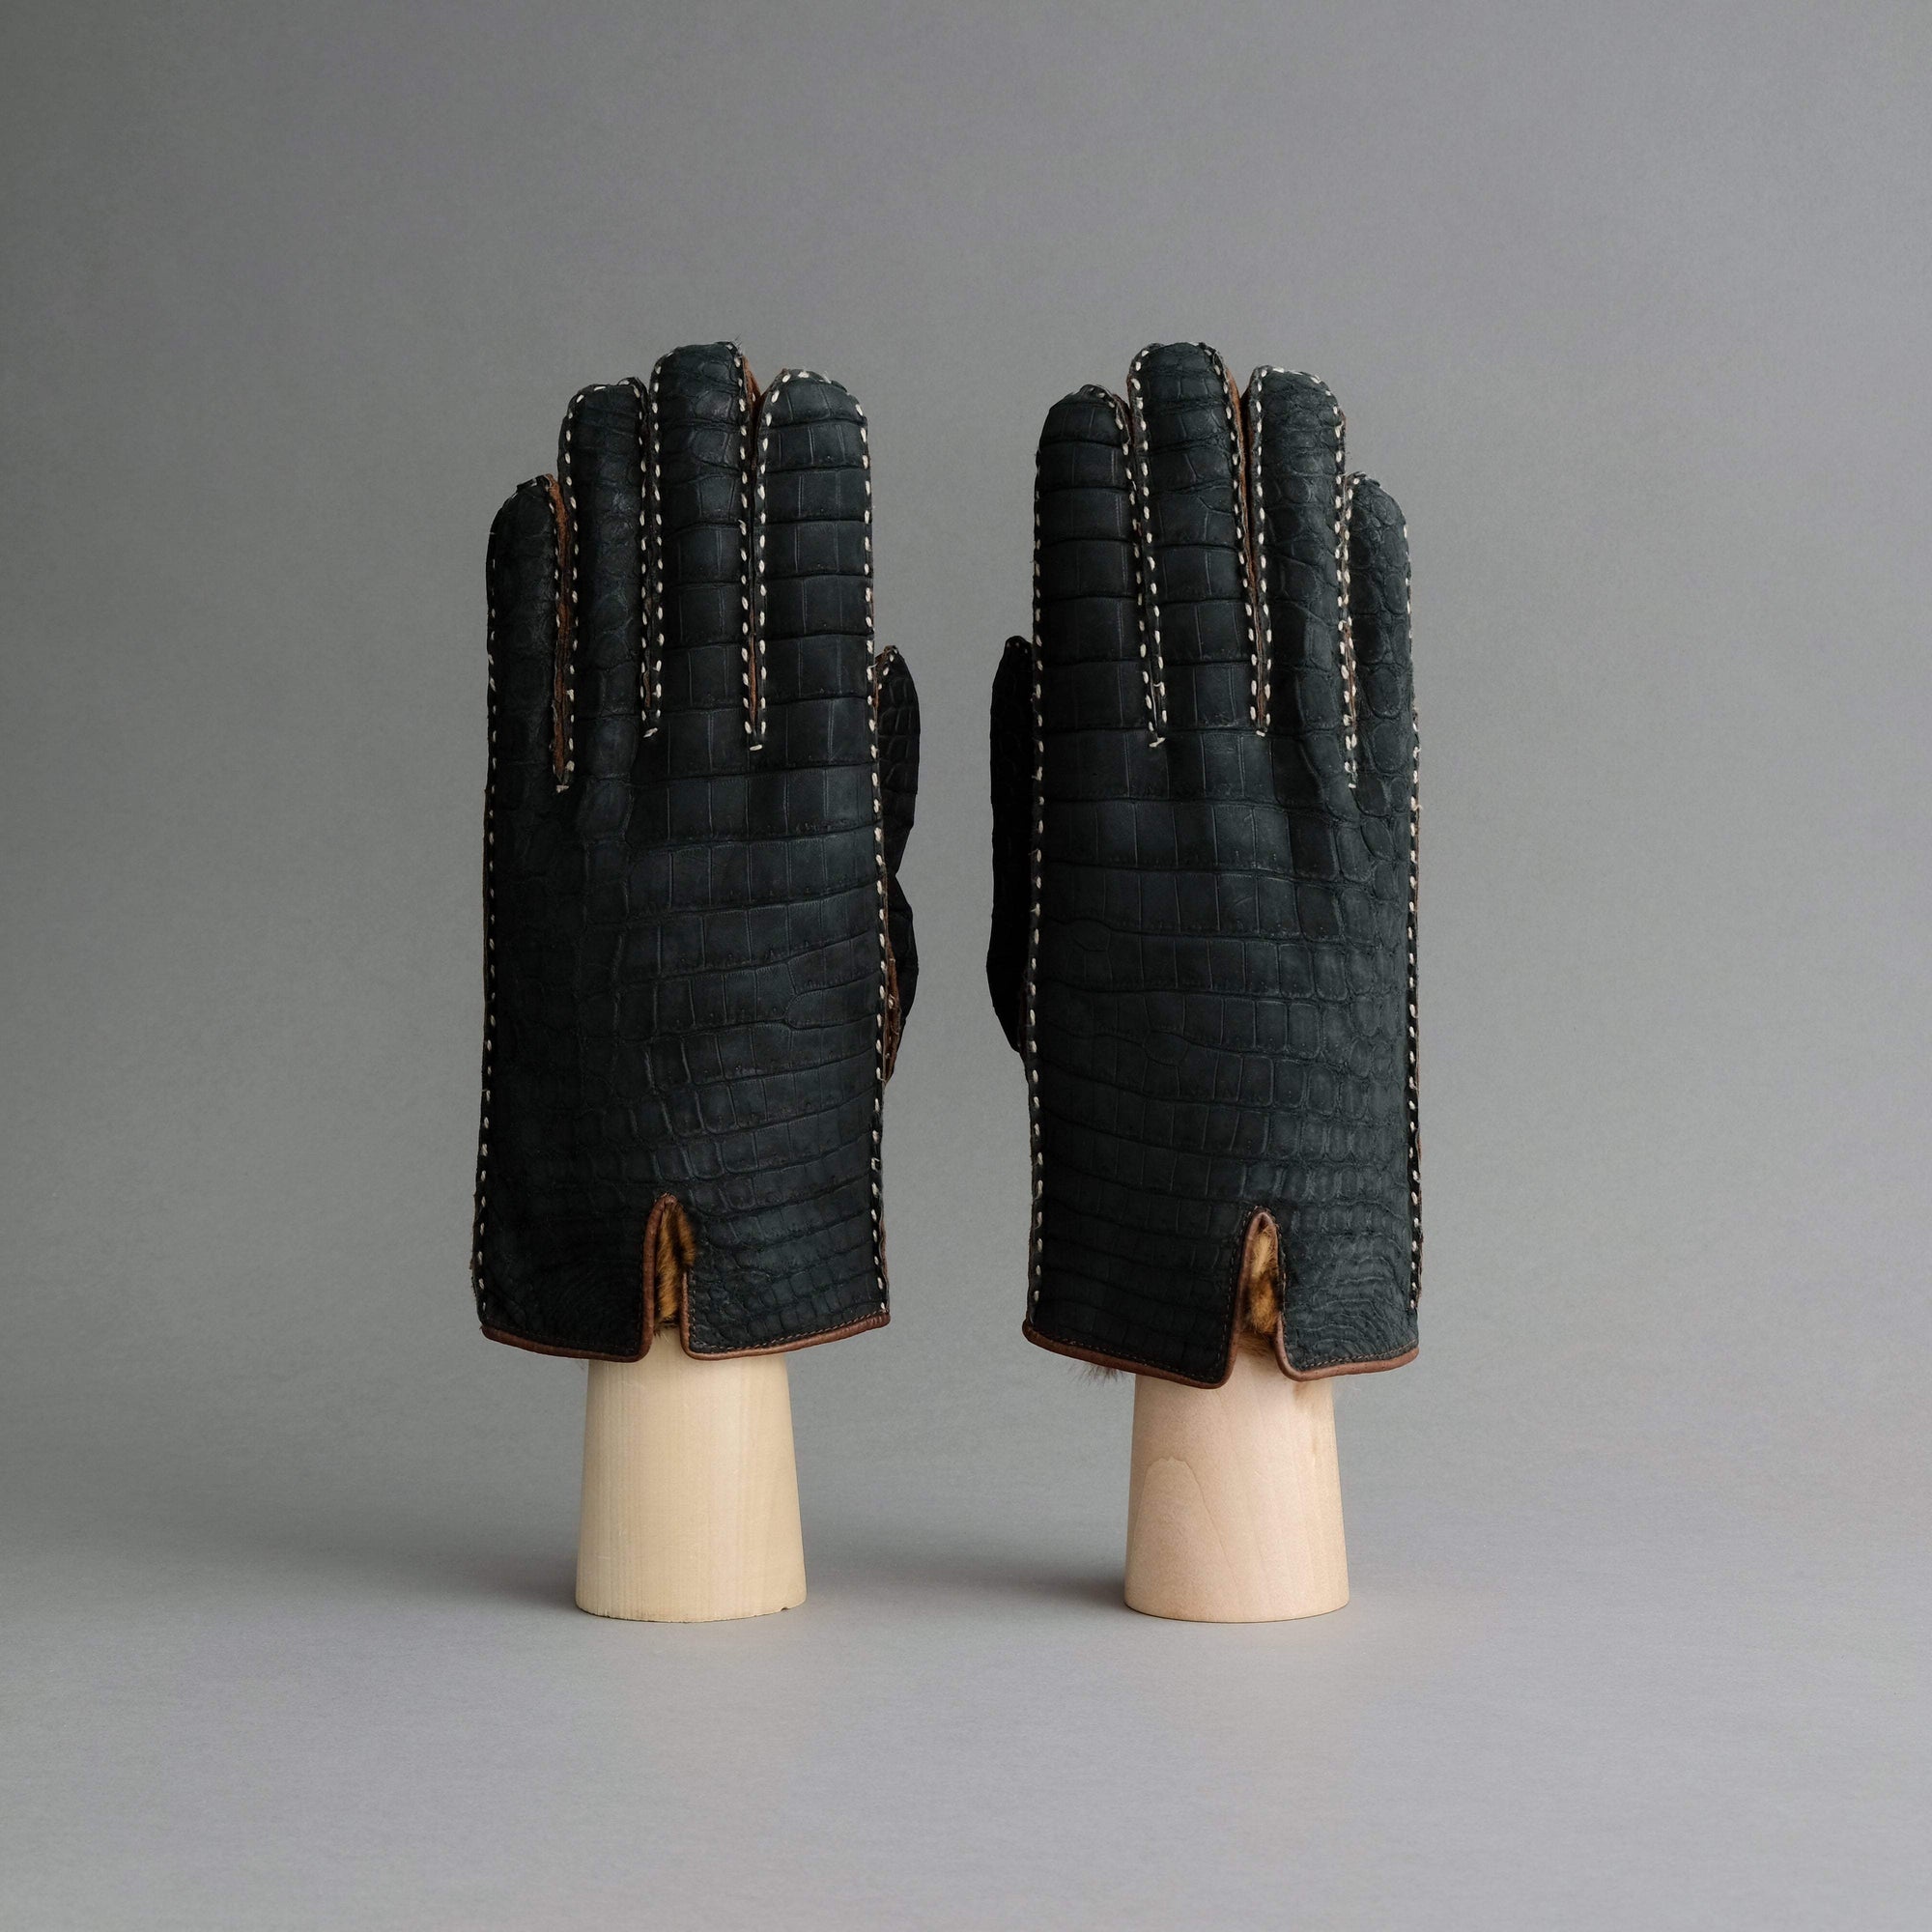 Gentlemen's Gloves from Crocodile and Peccary Leather - TR Handschuhe Wien - Thomas Riemer Handmade Gloves